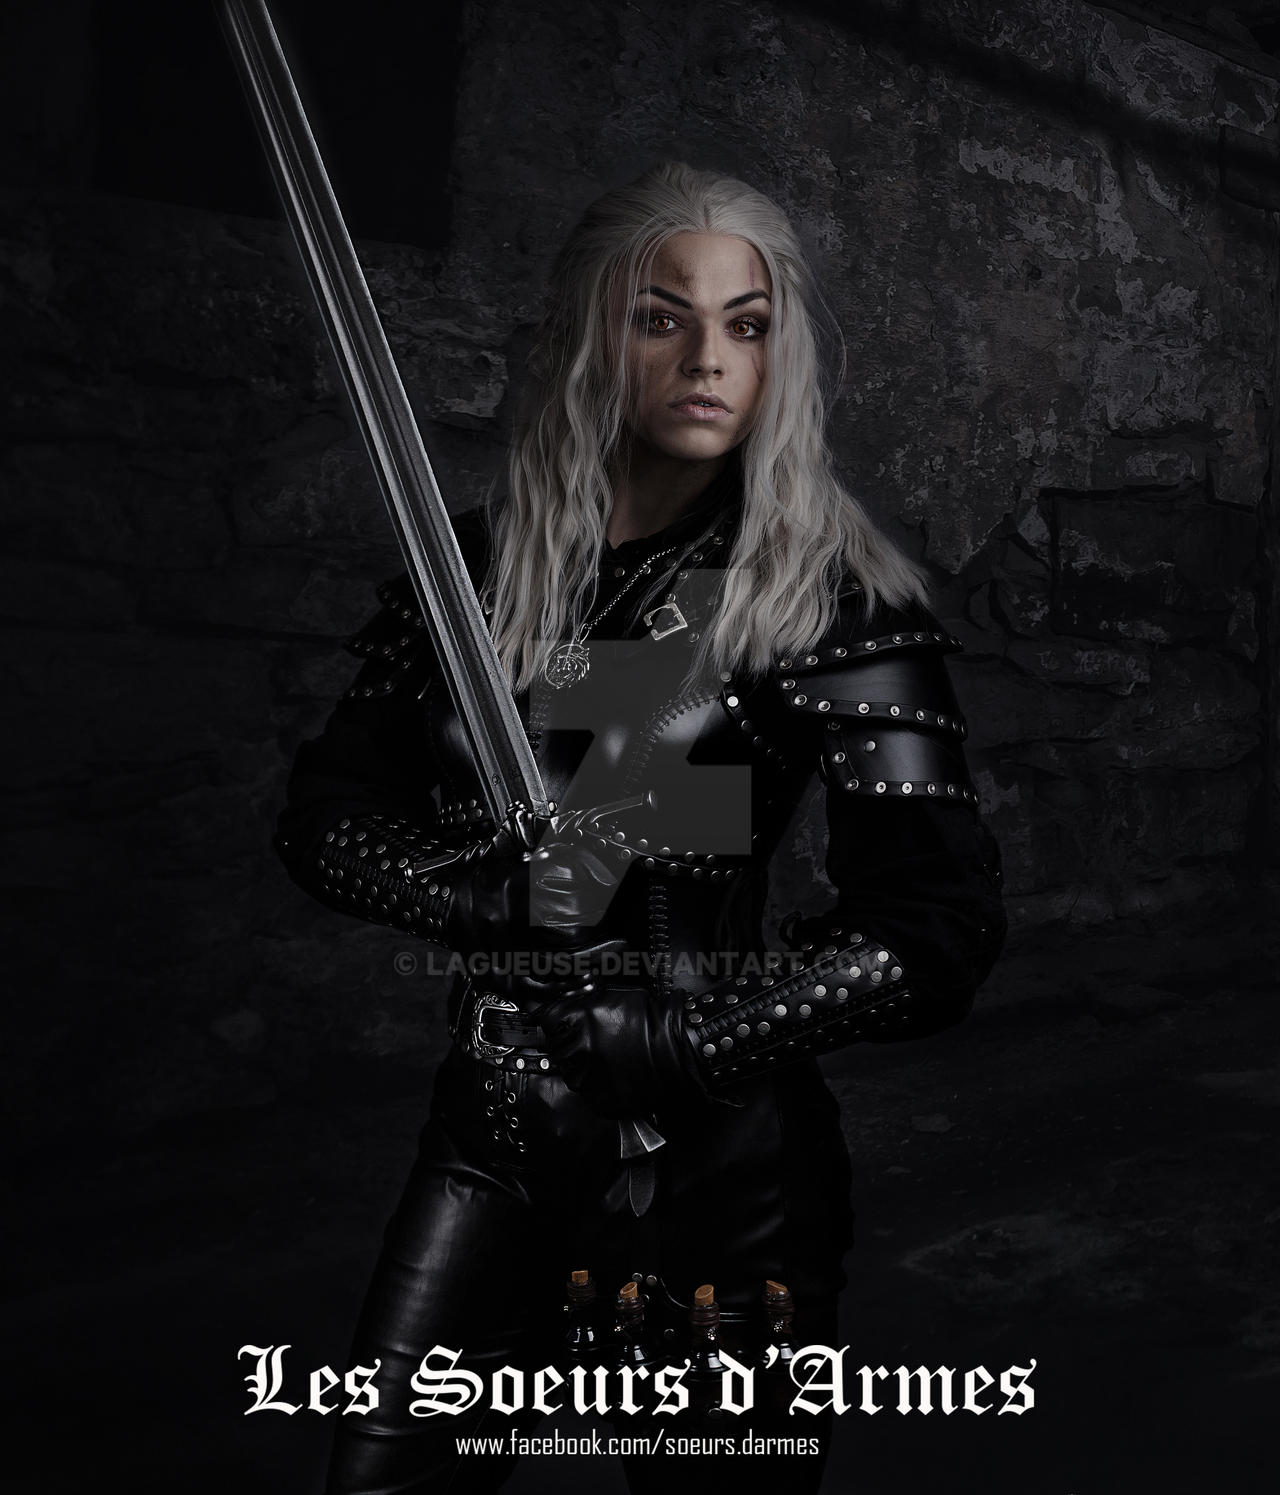 The Witcher Armor Genderbend Cosplay By Lagueuse On Deviantart